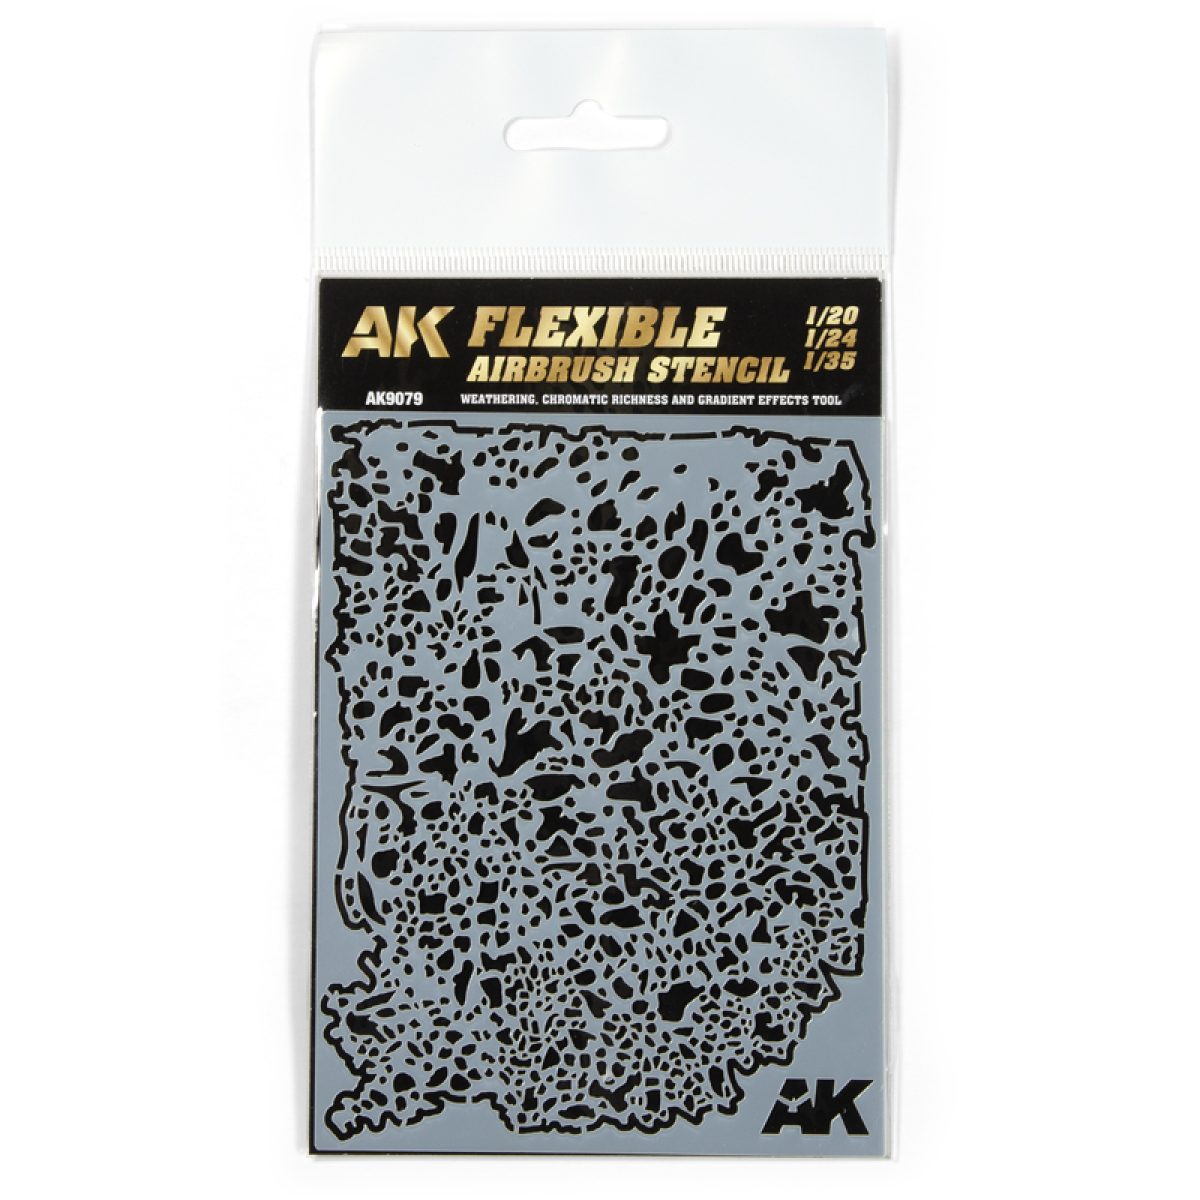 Buy FLEXIBLE AIRBRUSH STENCIL 1/20 - 1/24 - 1/35 online for8,50€